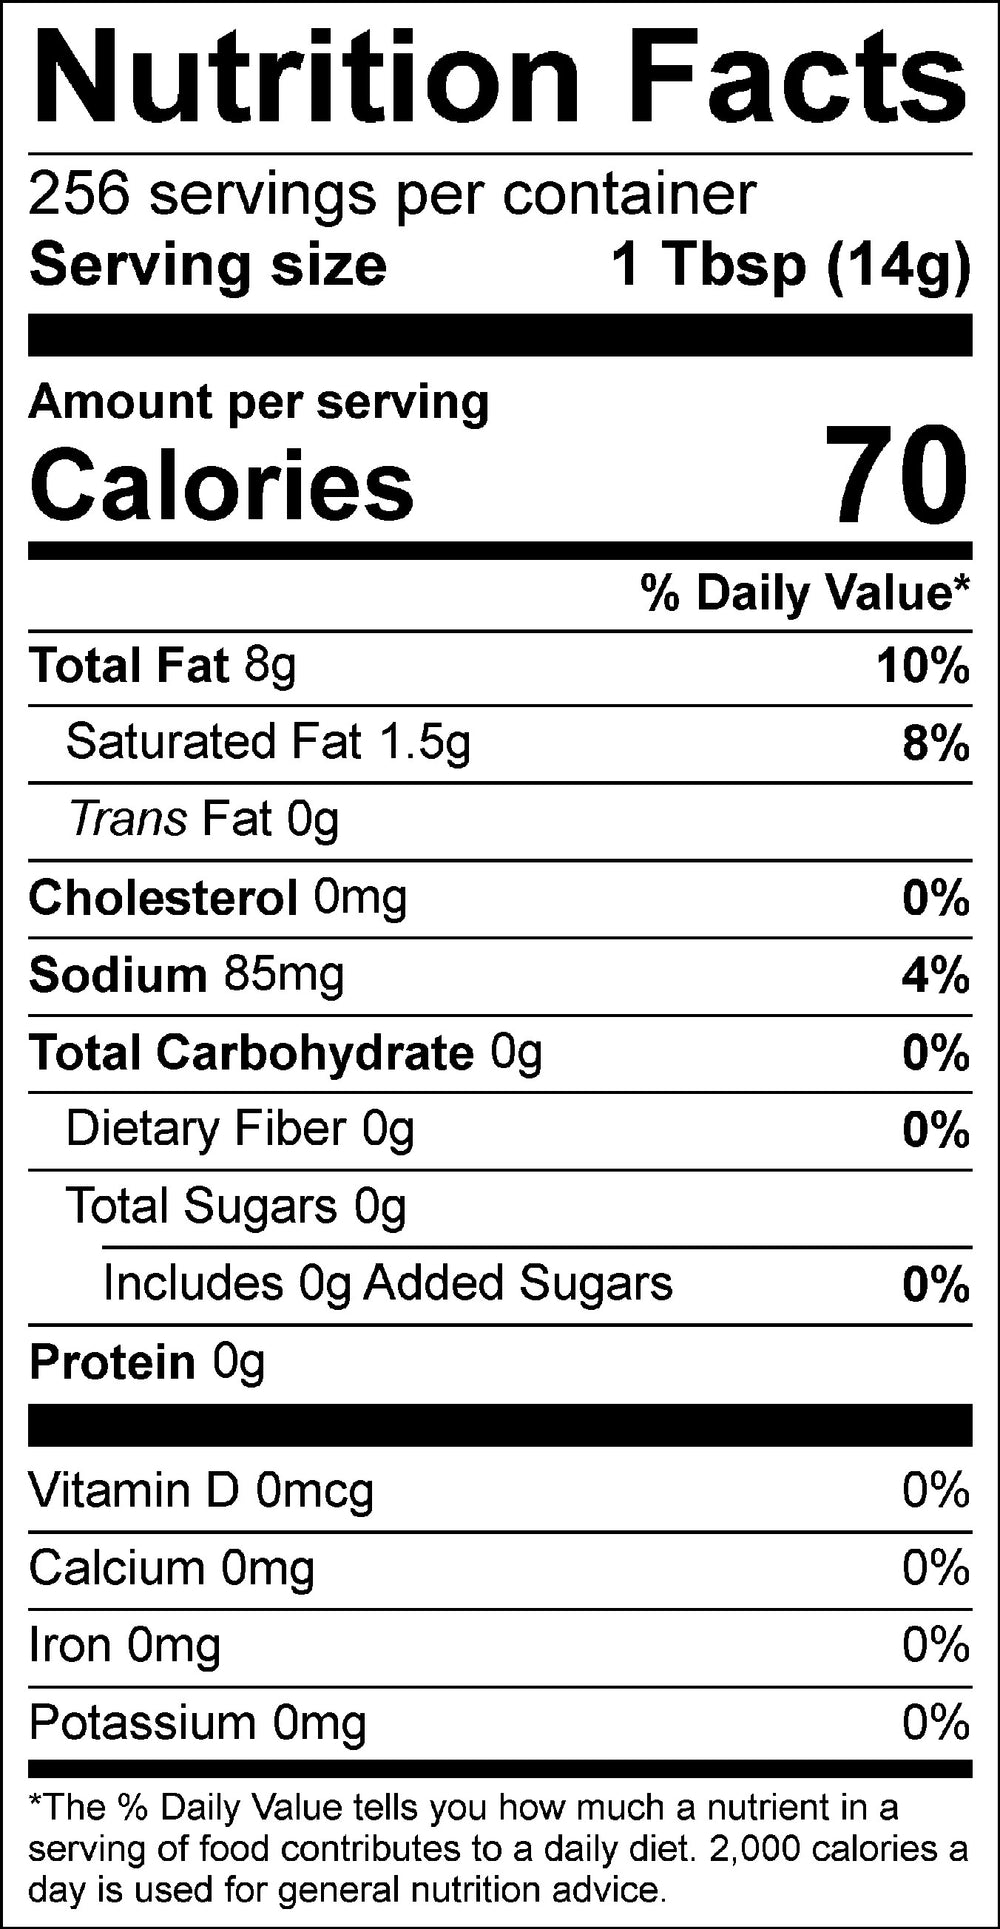 Nutritional Facts